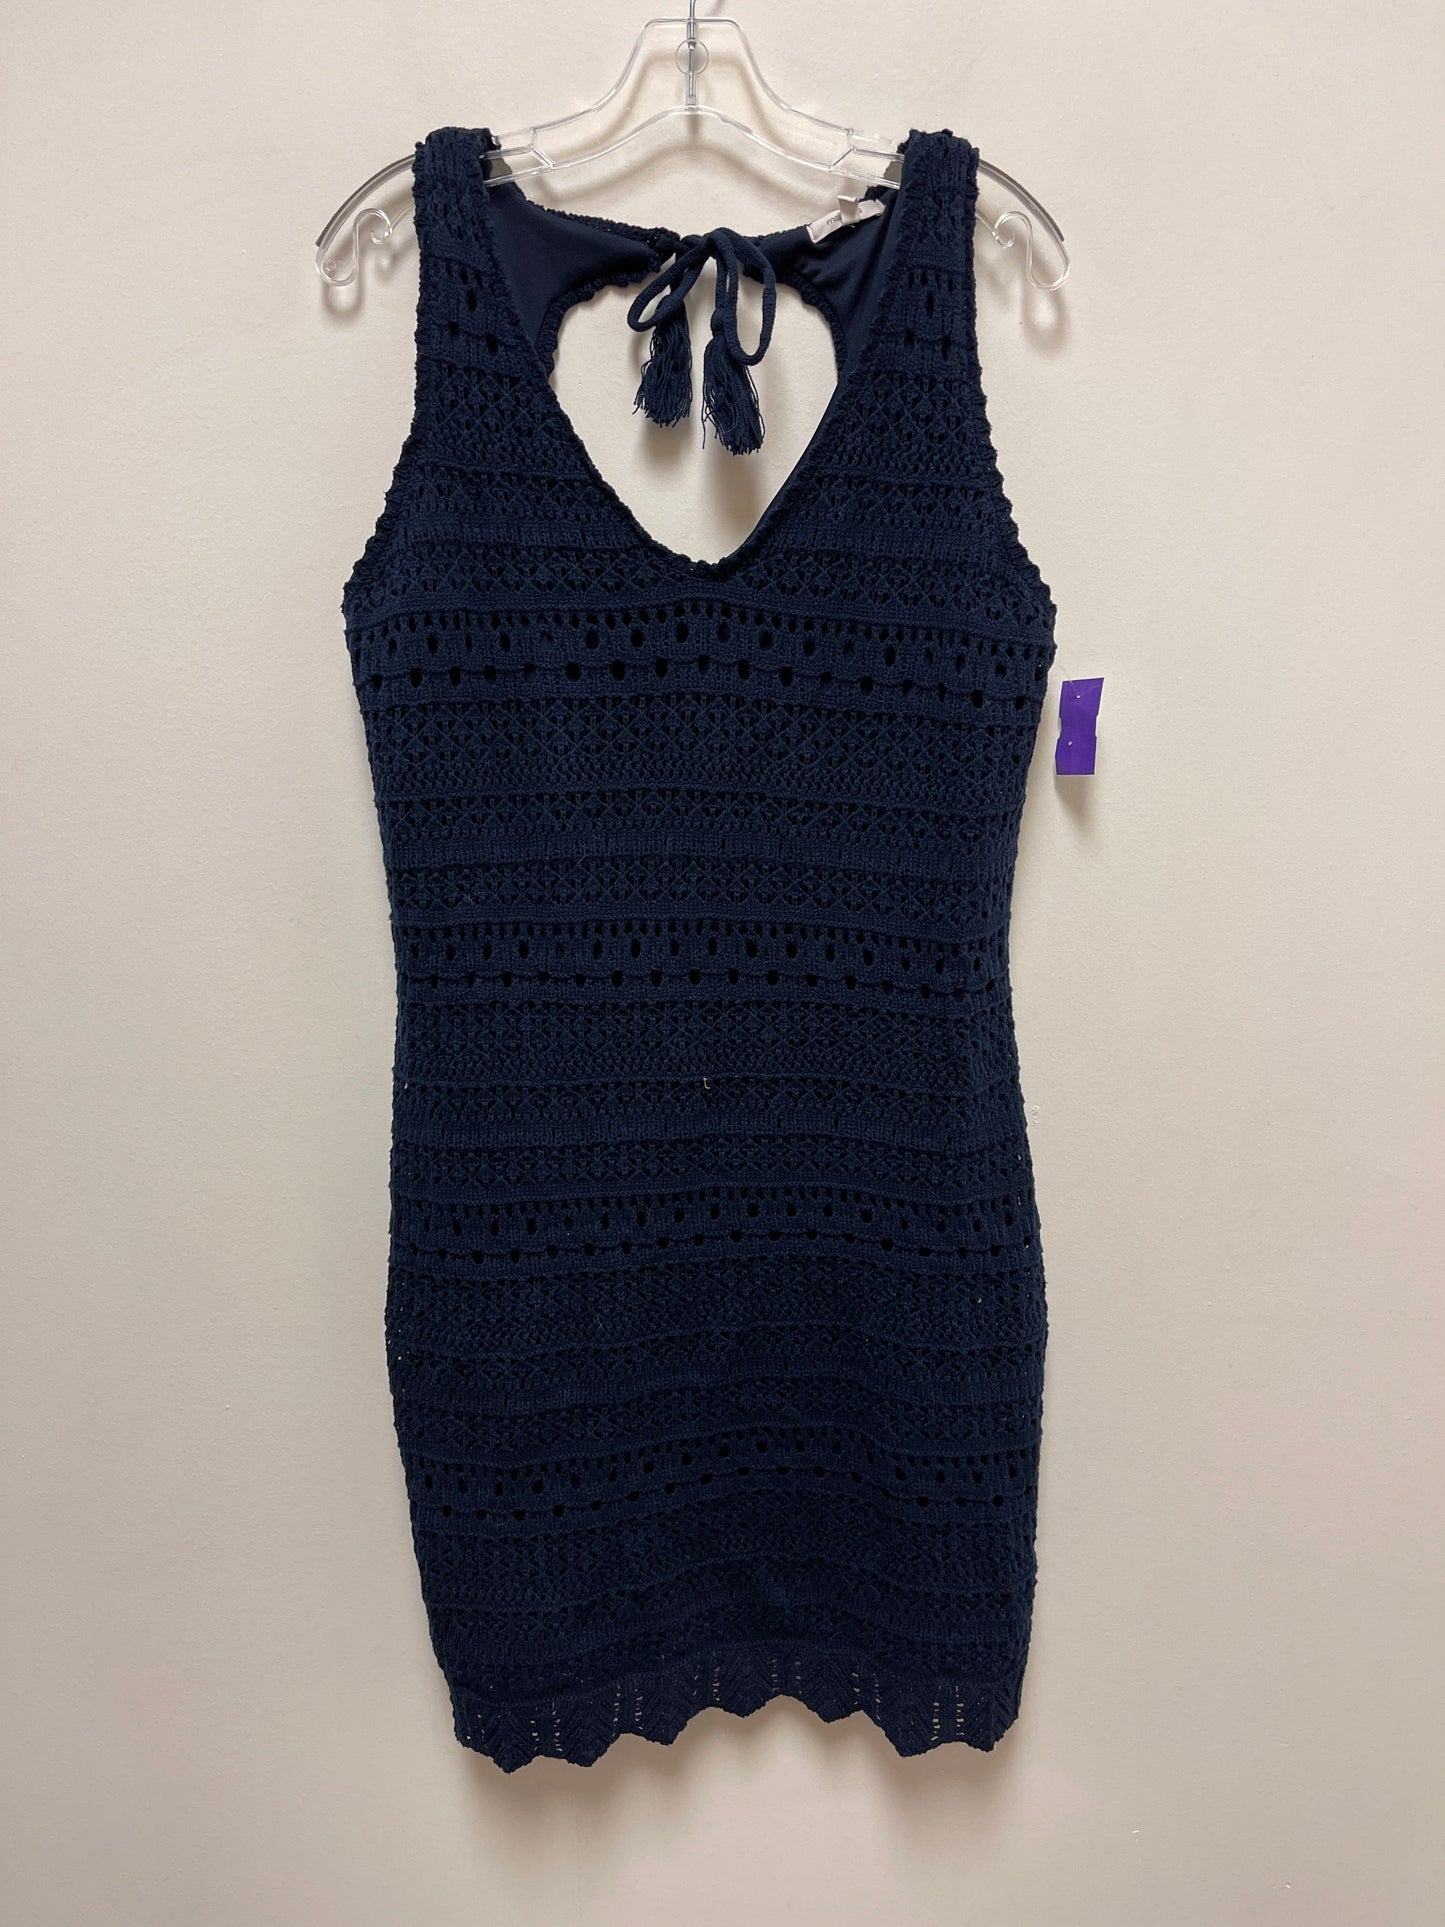 Navy Dress Casual Midi Maurices, Size 2x